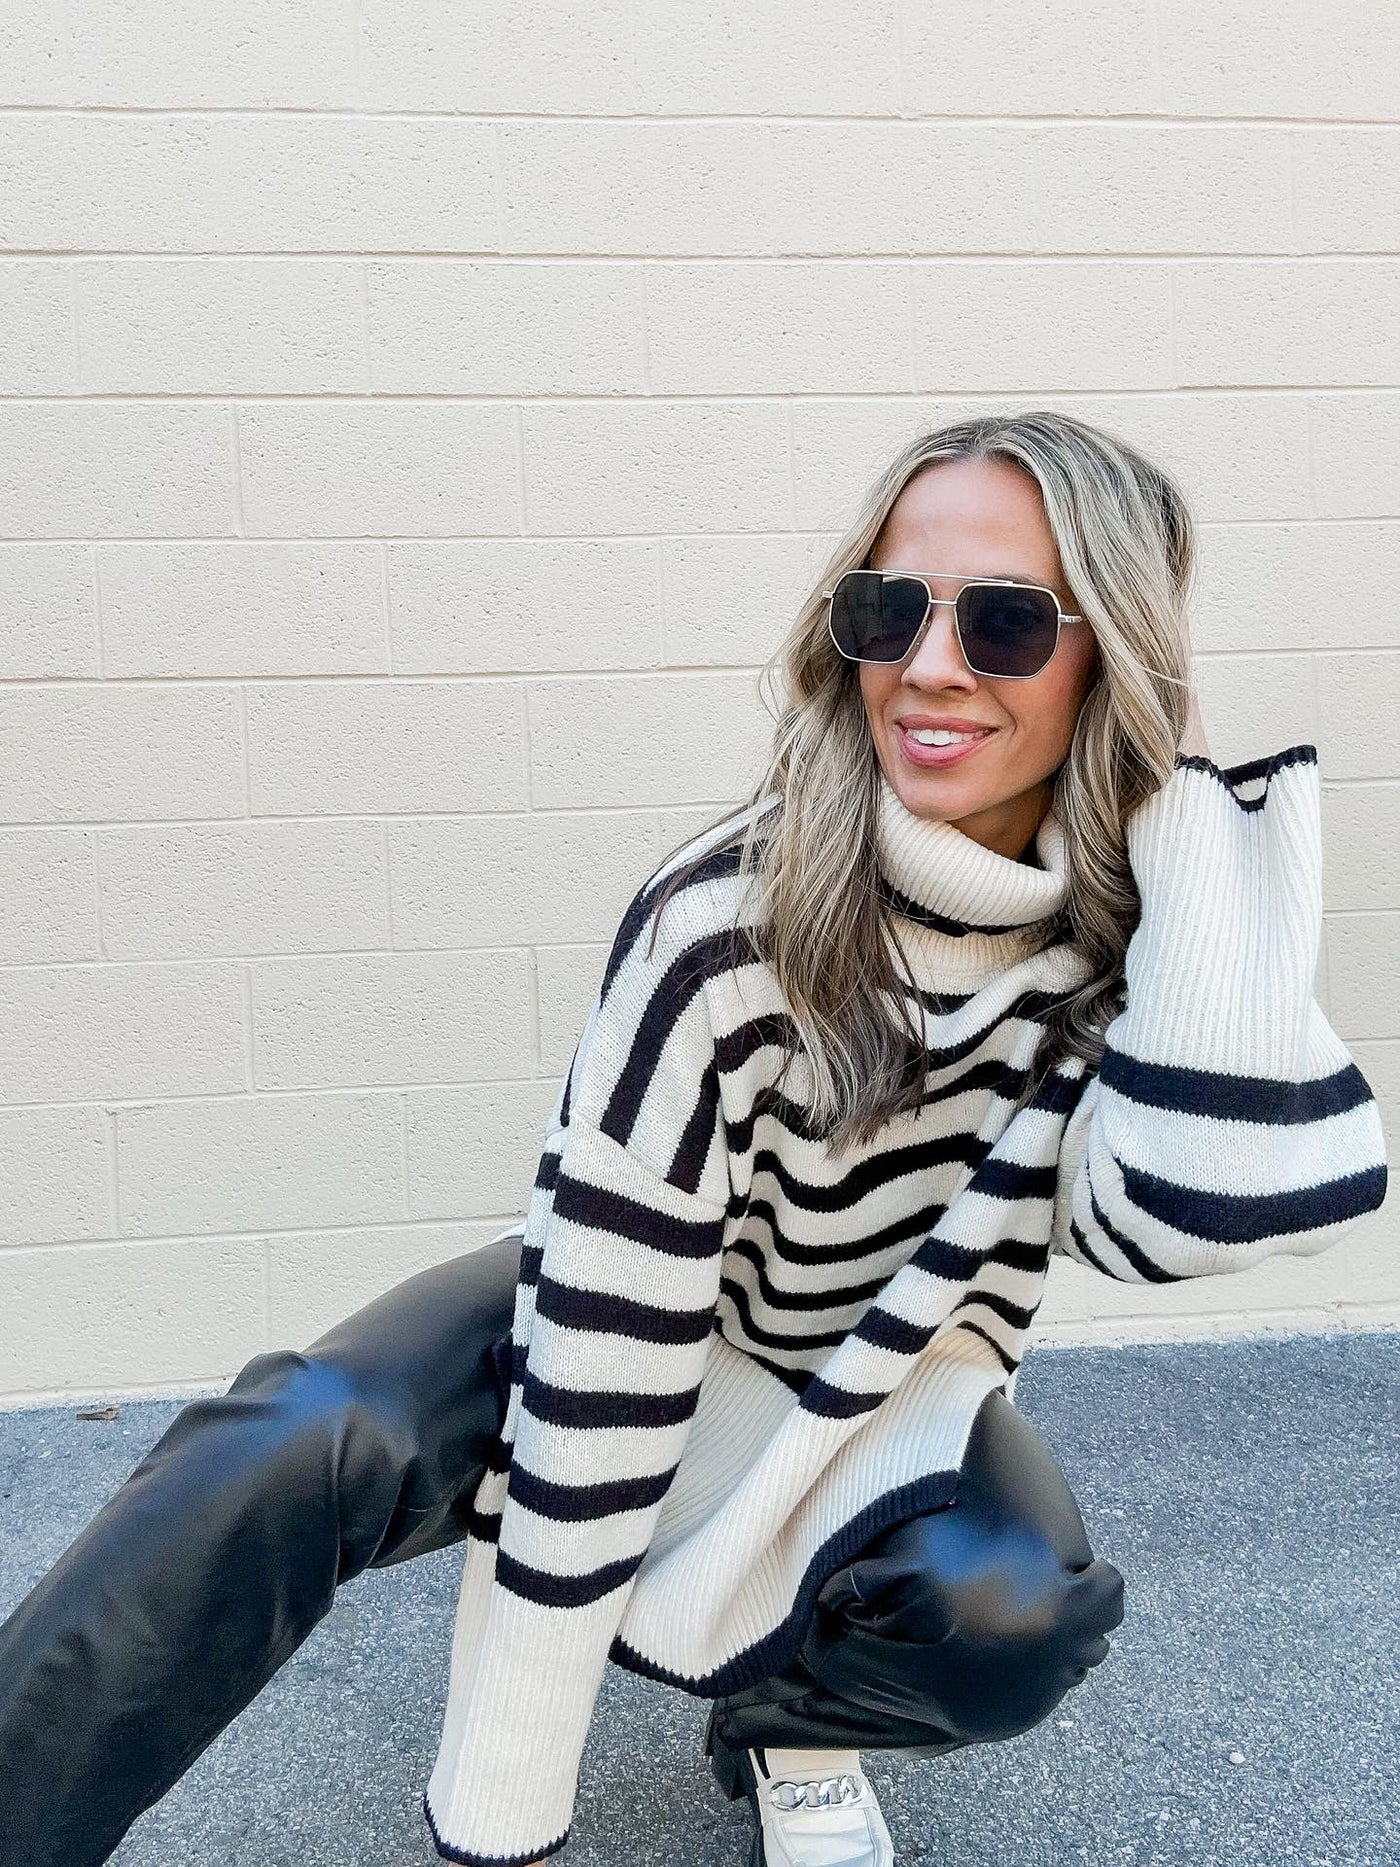 Stevie Striped Turtleneck Pullover Knit Sweater